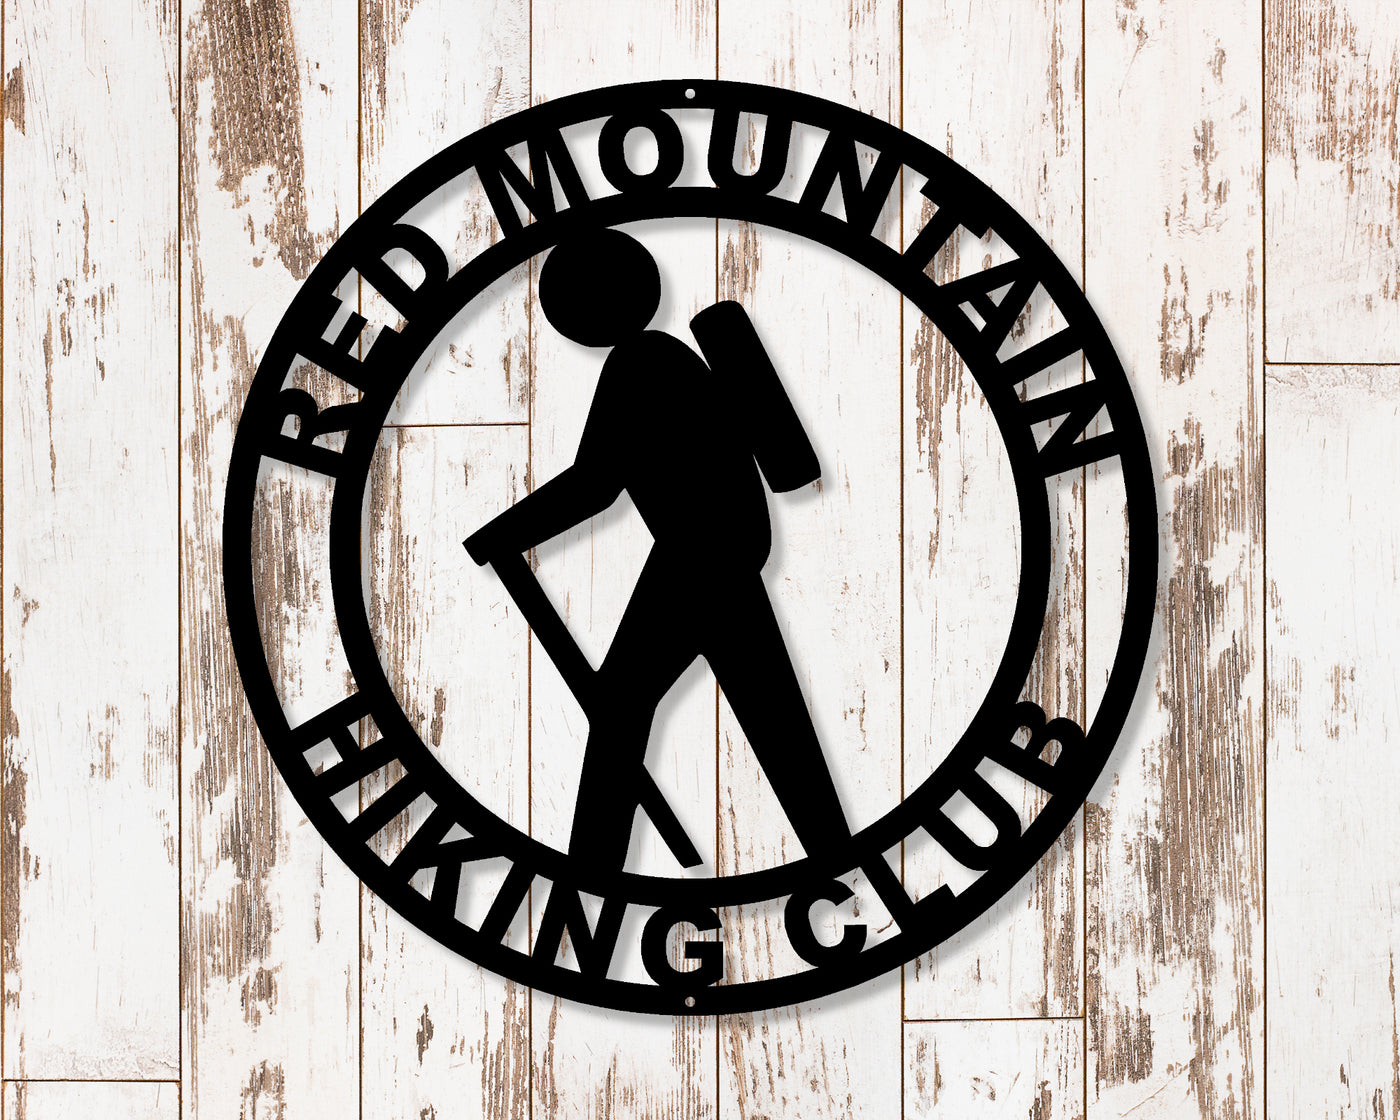 Personalized Hiking Metal Sign - Madison Iron and Wood - Personalized sign - metal outdoor decor - Steel deocrations - american made products - veteran owned business products - fencing decorations - fencing supplies - custom wall decorations - personalized wall signs - steel - decorative post caps - steel post caps - metal post caps - brackets - structural brackets - home improvement - easter - easter decorations - easter gift - easter yard decor